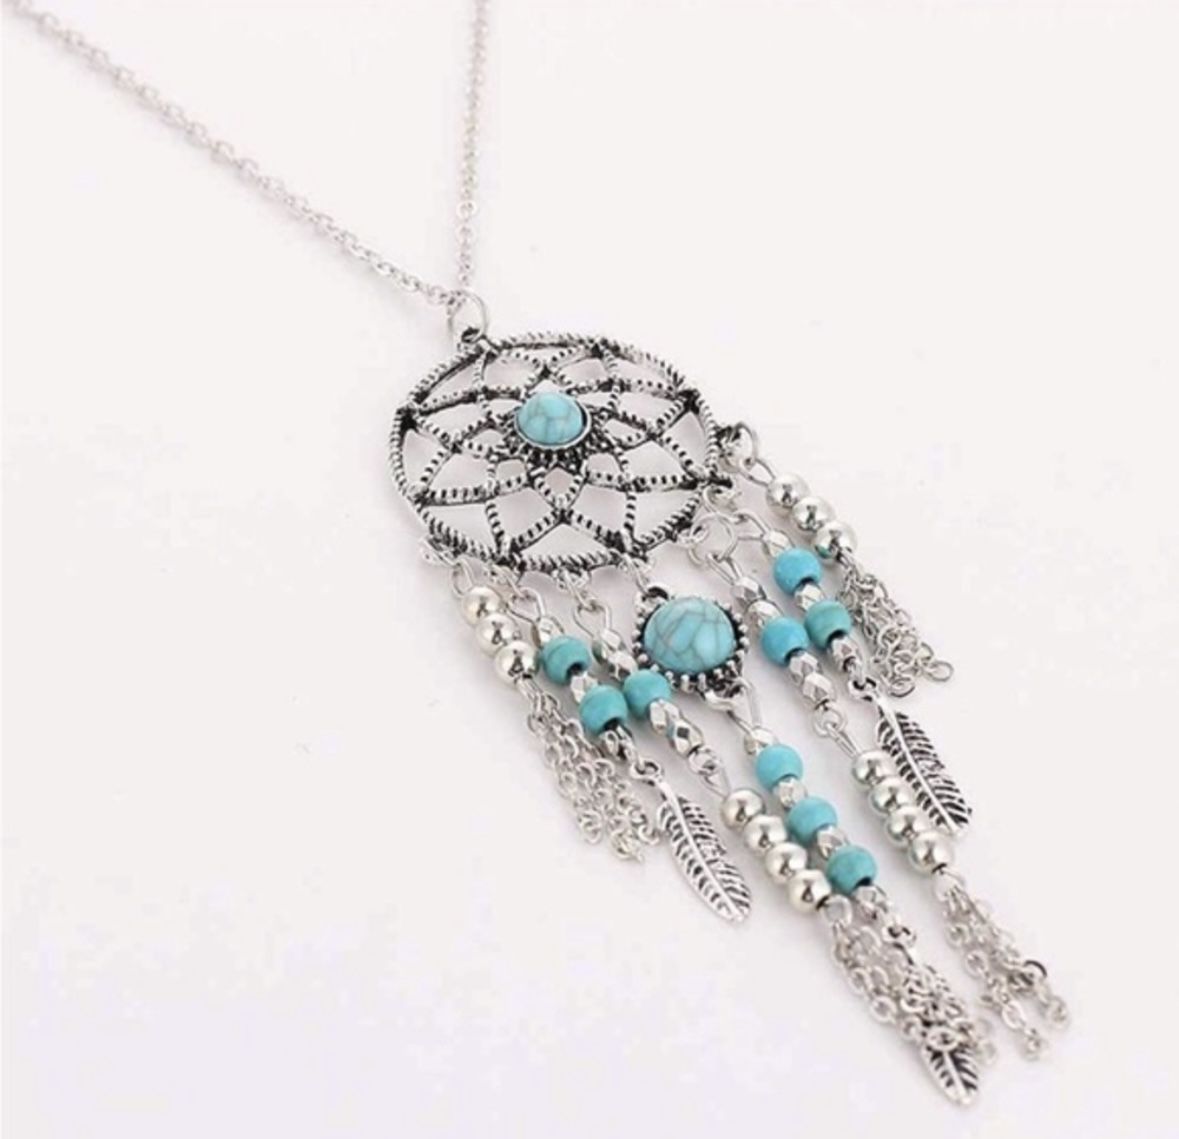 Boho Dreamcatcher Feather Turquoise Tassel Chain Charm Necklace Women Jewelry